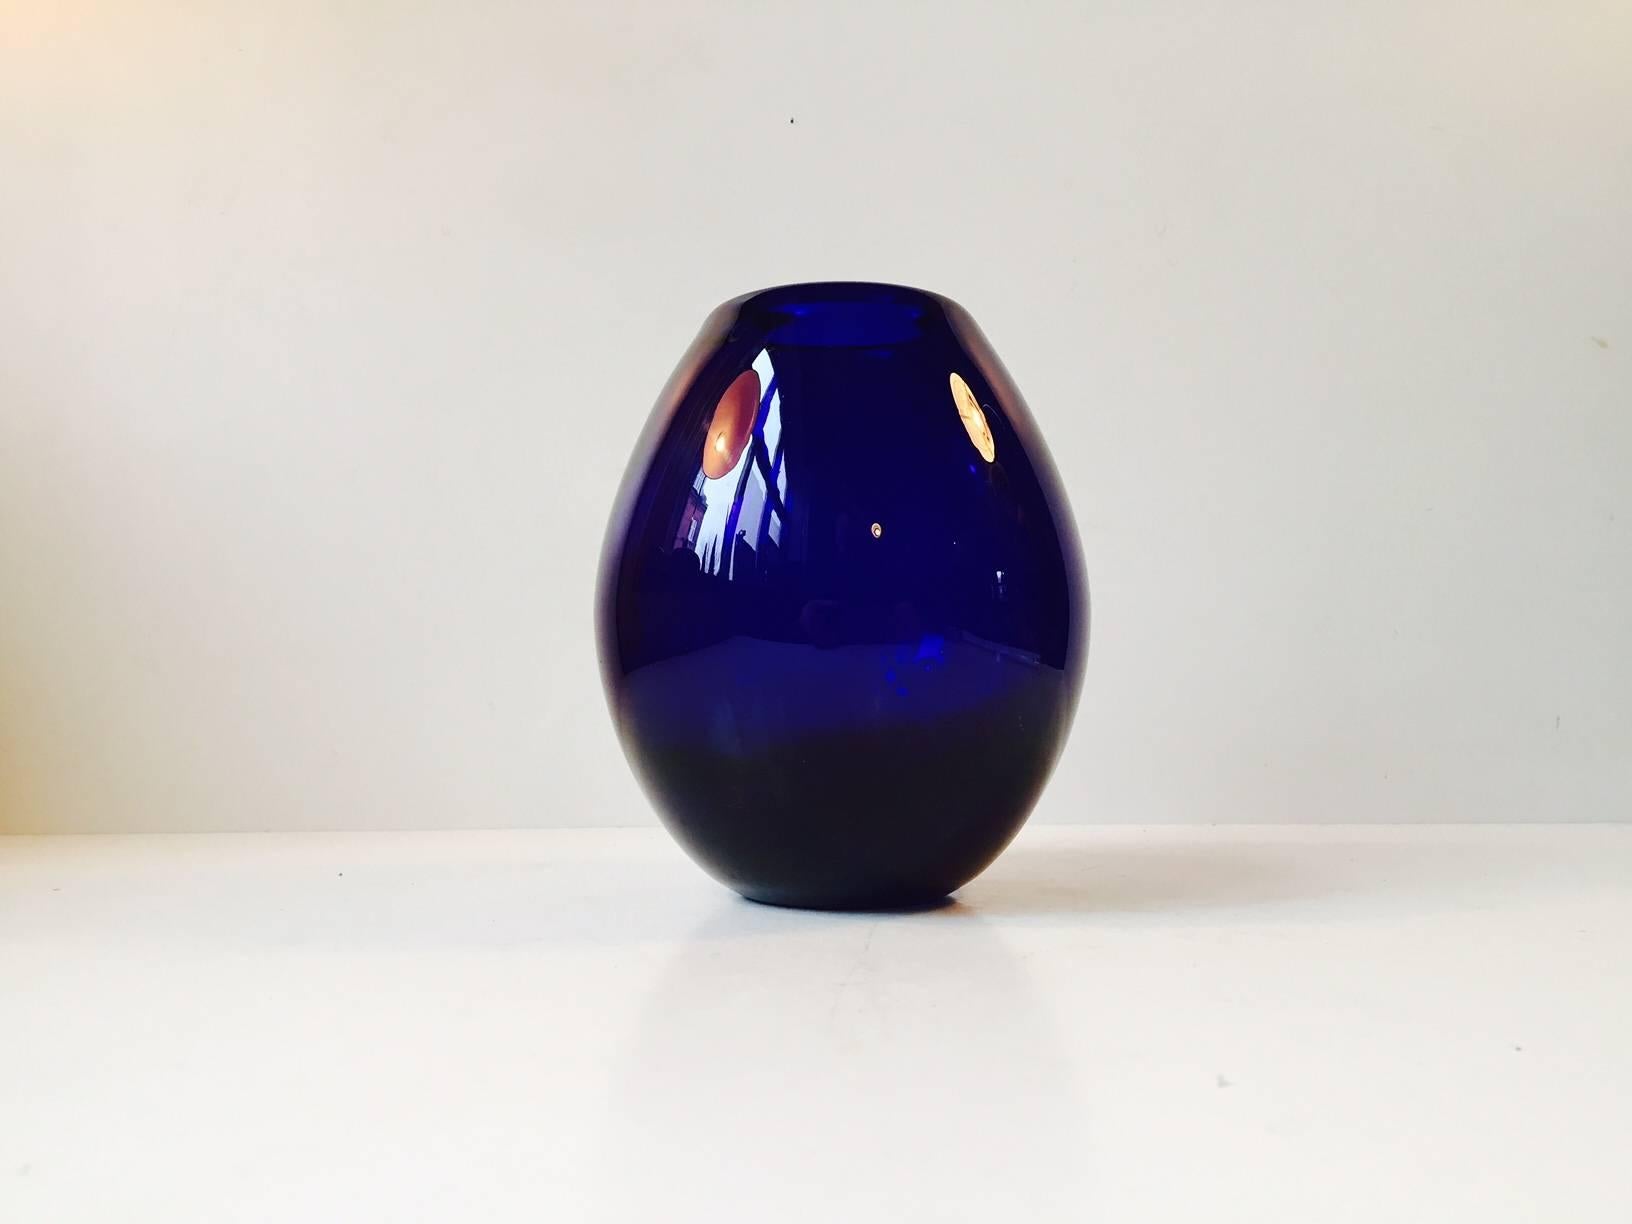 Unique and organically shaped dark blue art glass by Danish designer Per Lütken. Created at Holmegaard Studio in the early 1960s. Handblown thick and heavy glass.